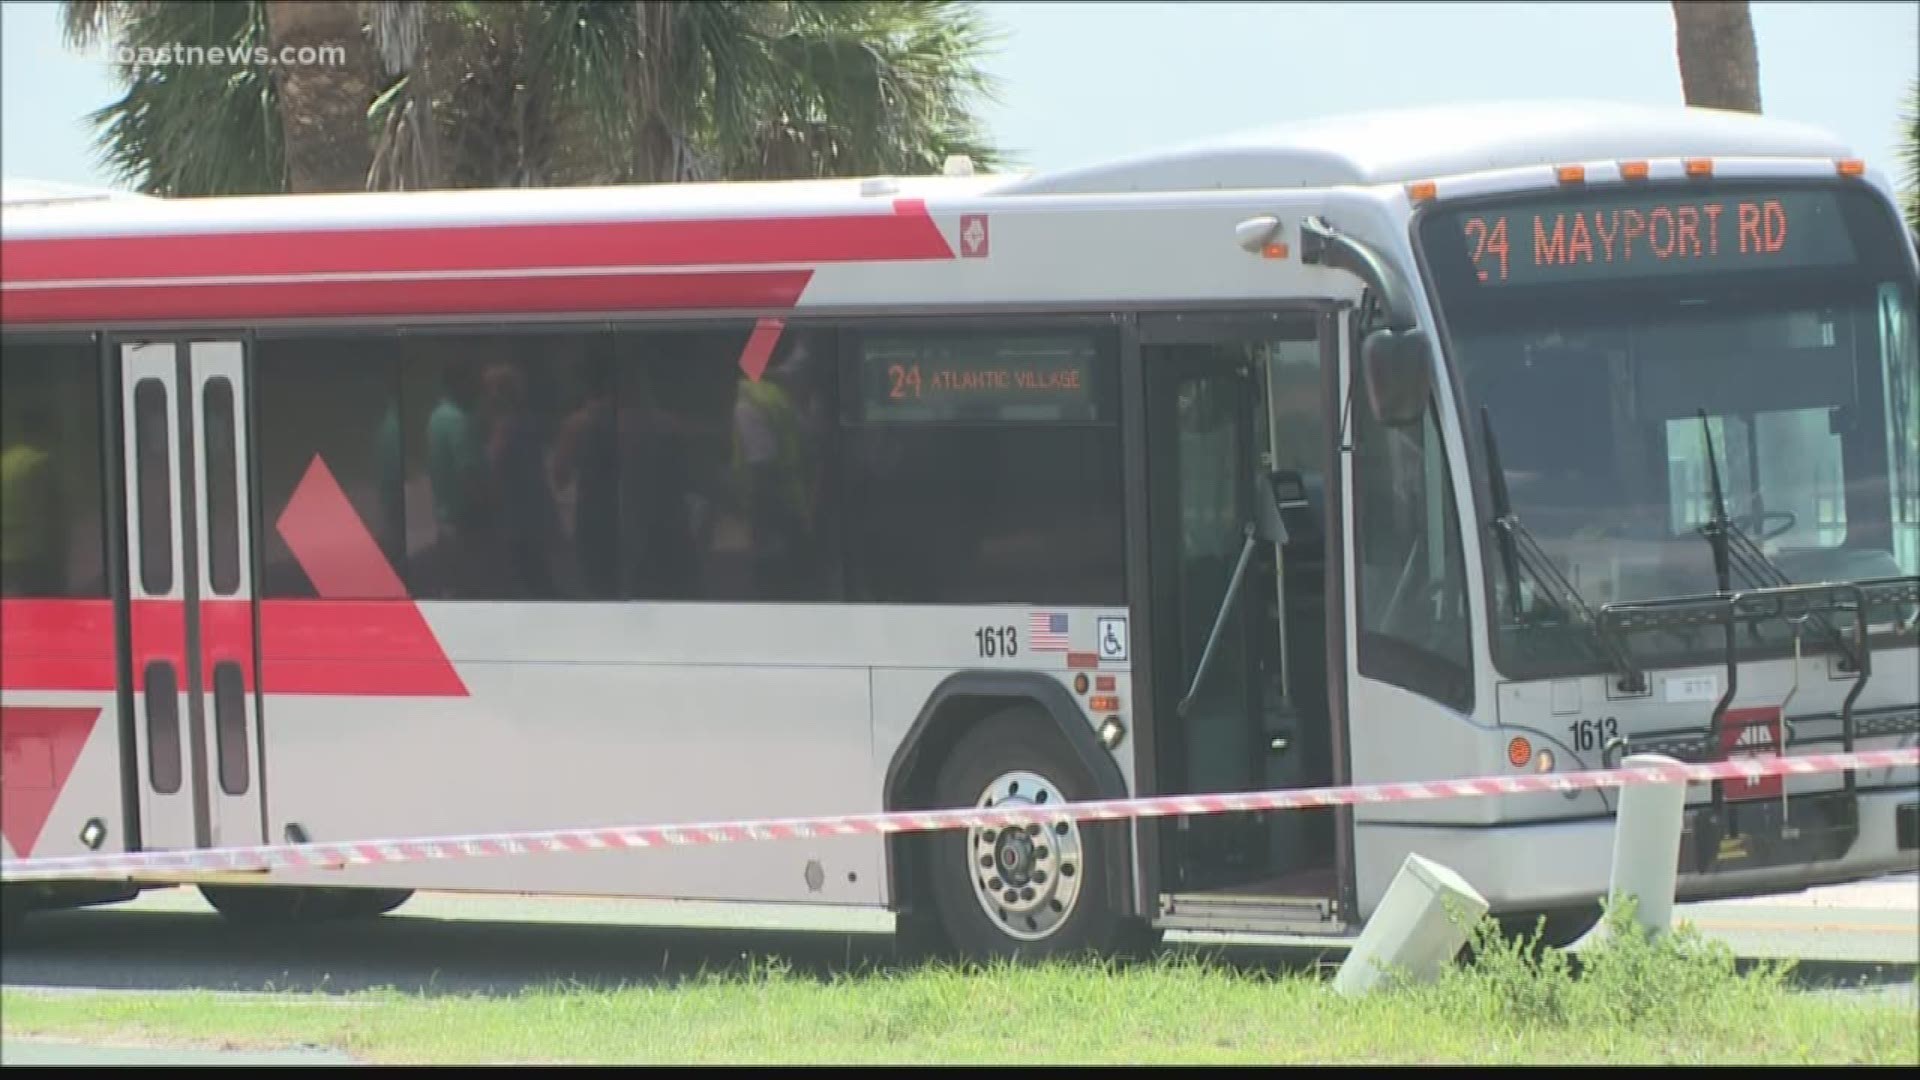 A spokesperson with JTA released a statement identifying the bus driver involved in the deadly incident has Jean Silney.